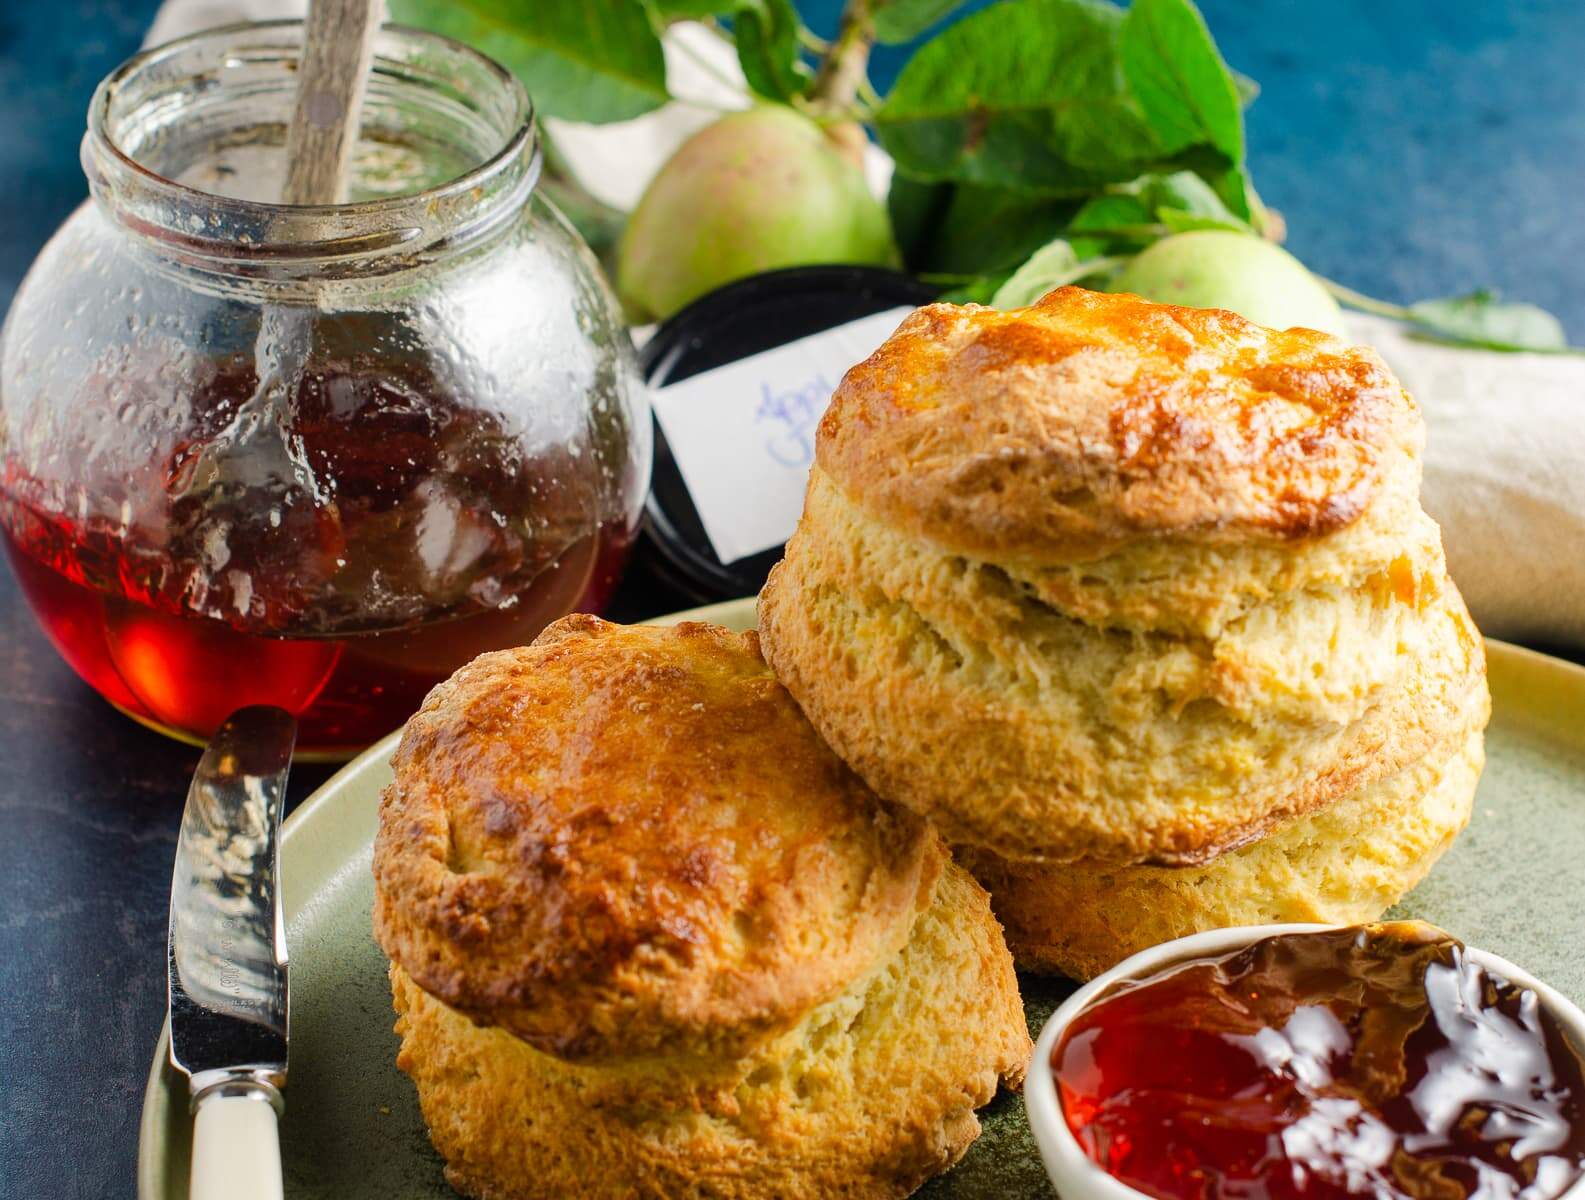 3 fresh scones and apple jelly / jam served on a green plate.